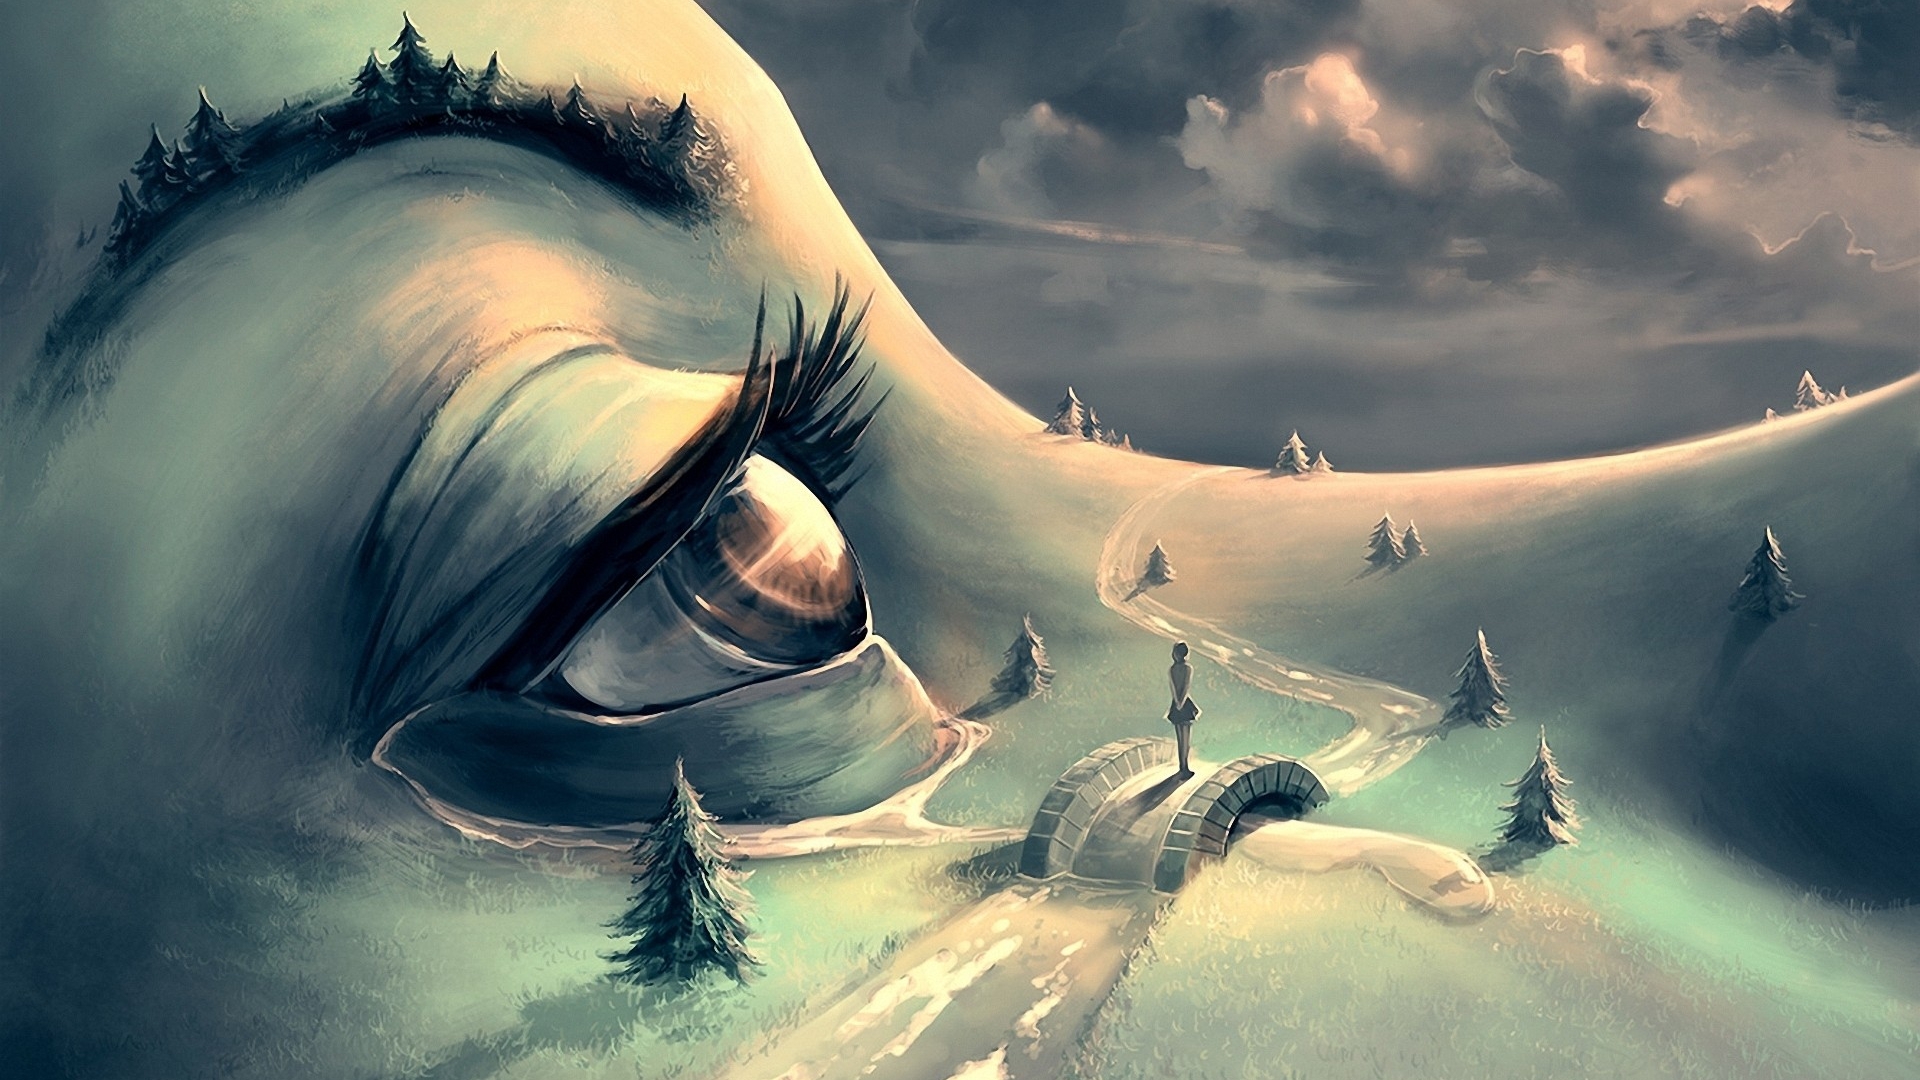 Face Hidden in Nature by Cyril Rolando